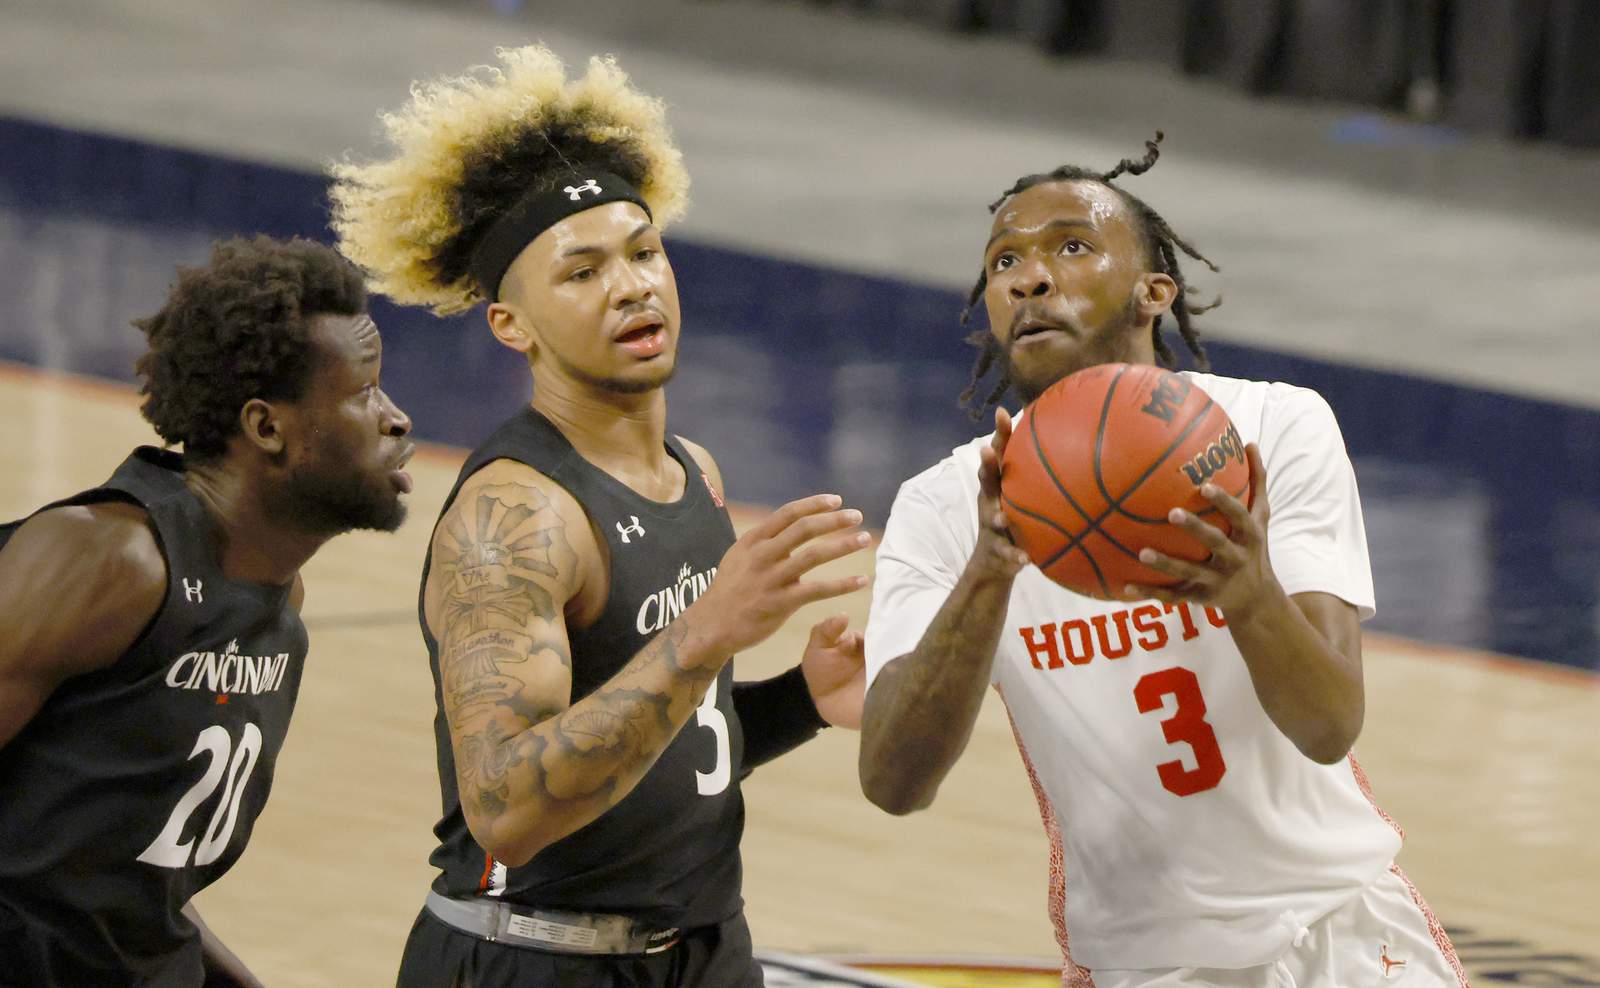 GALLERY: No. 7 Houston takes AAC tourney with 91-54 win over Cincy